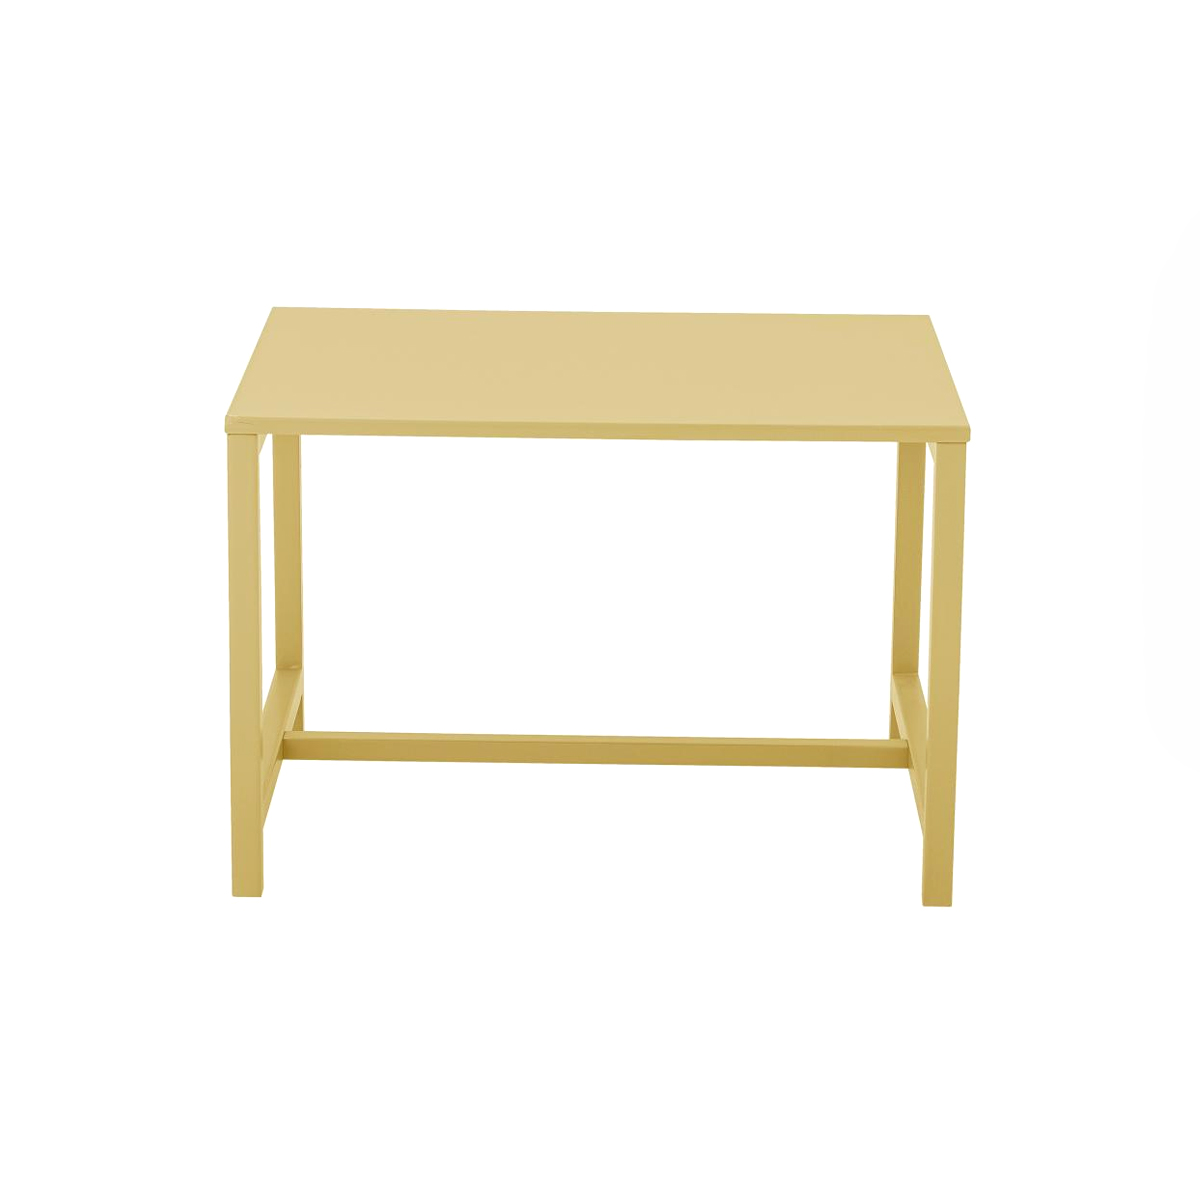 Rese Table, Yellow, Mdf 儿童桌